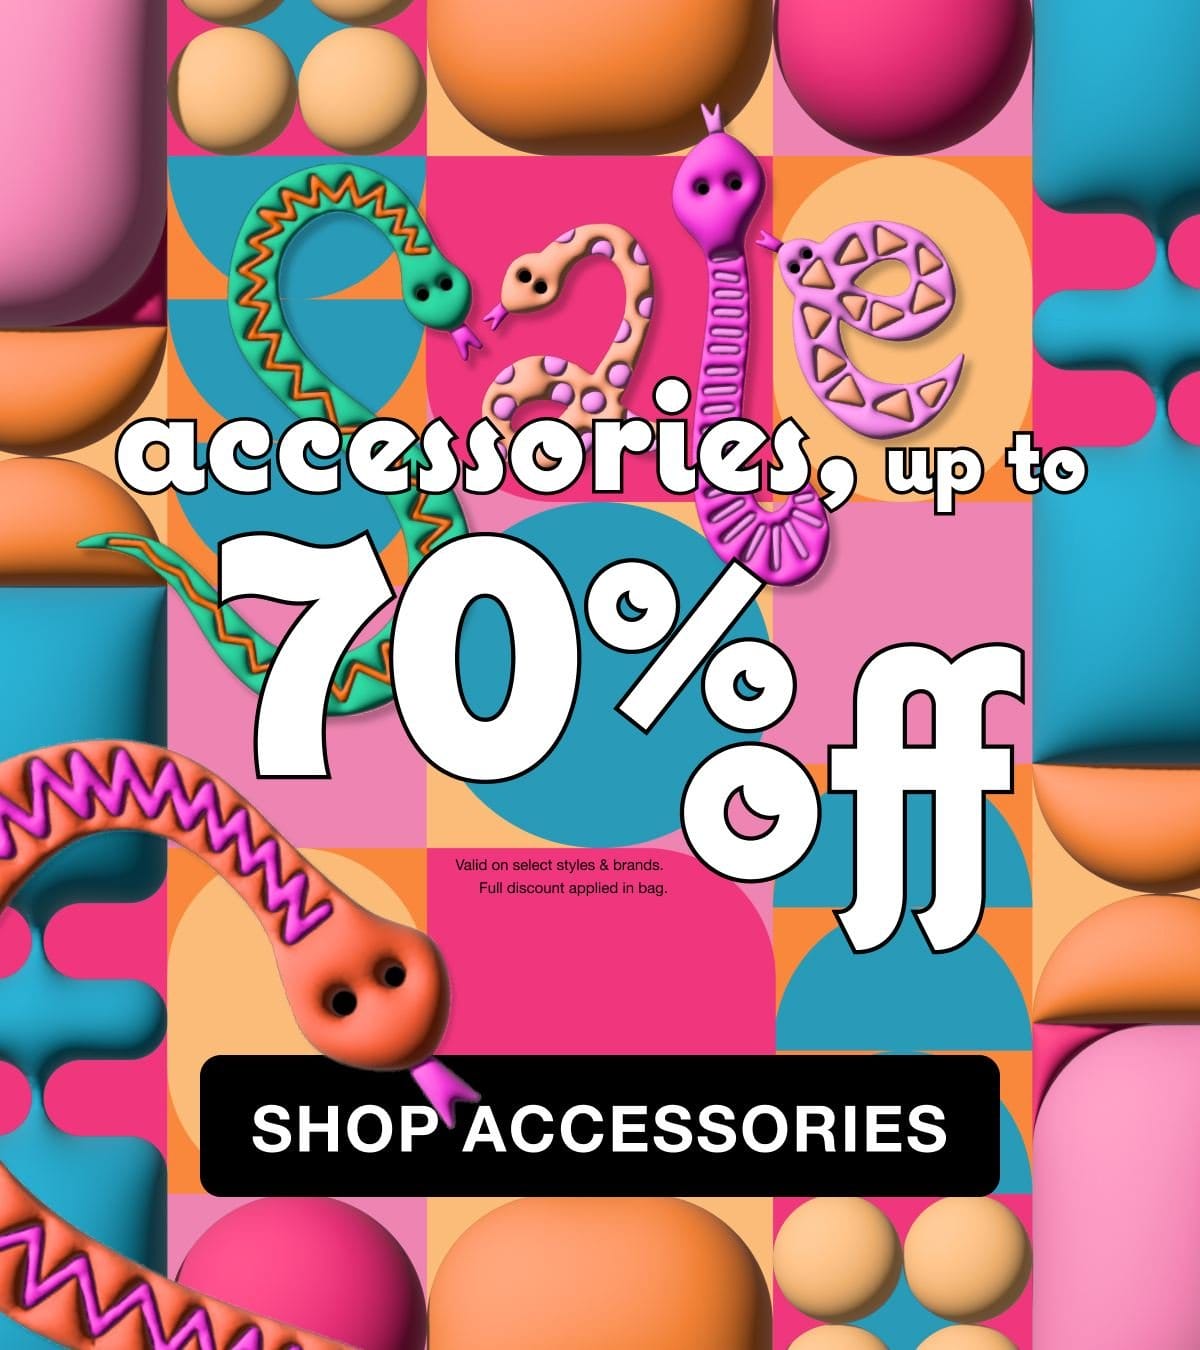 Get Up to 70% Off Accessories | SHOP 5-DAY SALE